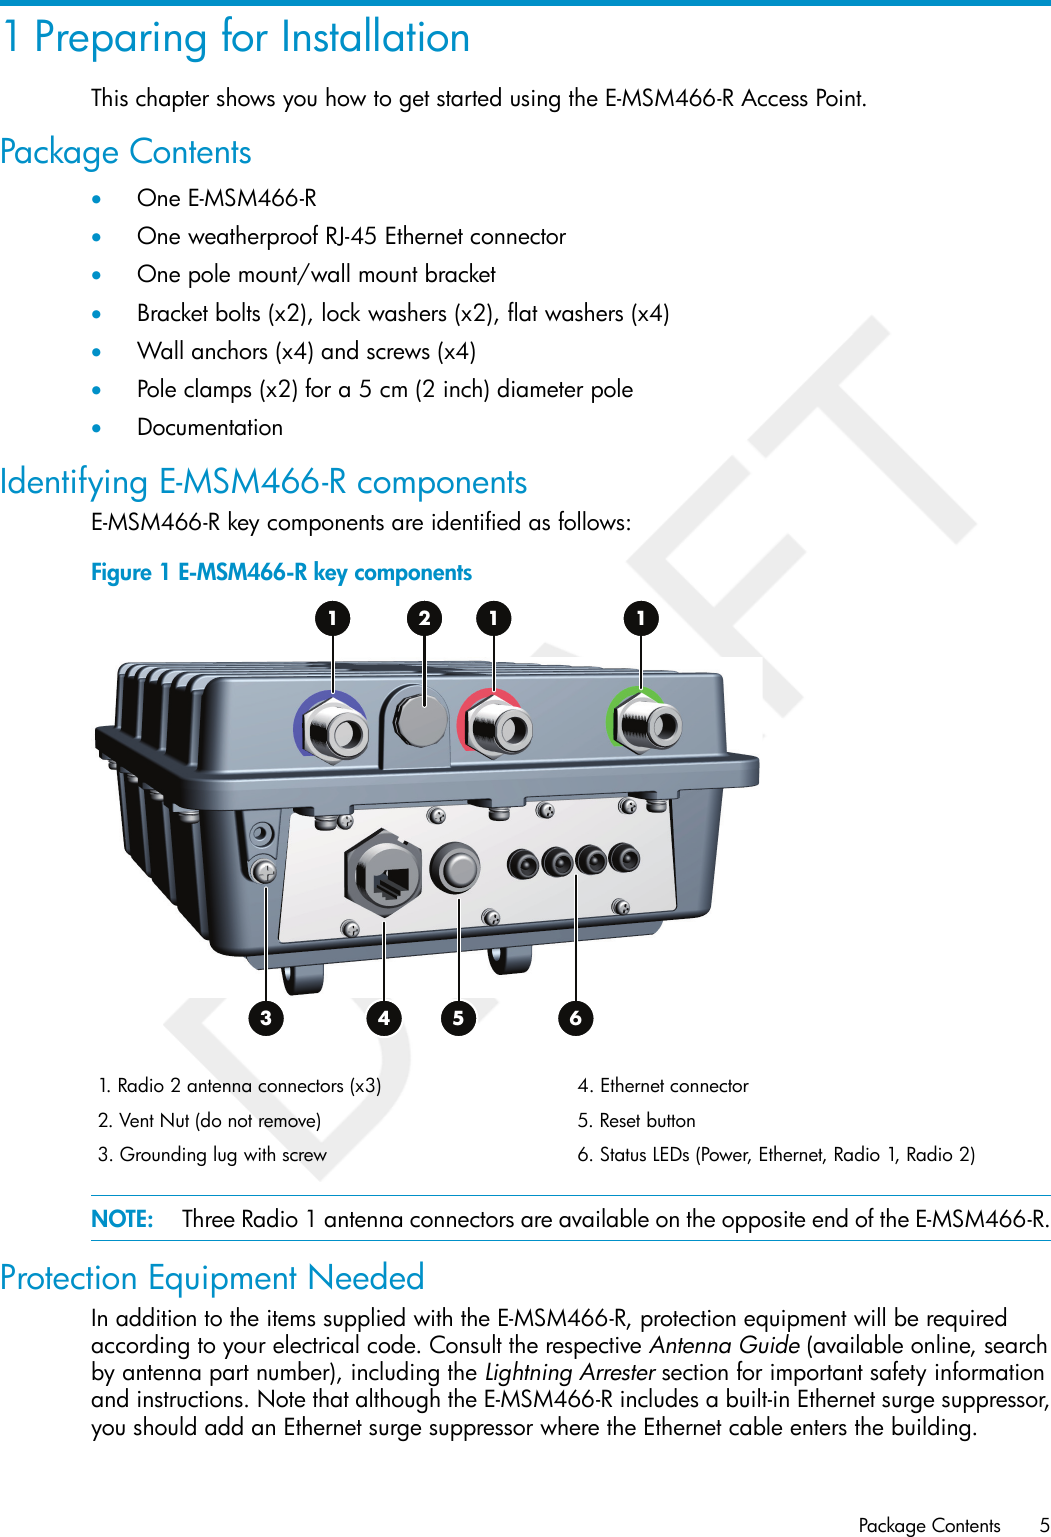 1 Preparing for InstallationThis chapter shows you how to get started using the E-MSM466-R Access Point.Package Contents•One E-MSM466-R•One weatherproof RJ-45 Ethernet connector•One pole mount/wall mount bracket•Bracket bolts (x2), lock washers (x2), flat washers (x4)•Wall anchors (x4) and screws (x4)•Pole clamps (x2) for a 5 cm (2 inch) diameter pole•DocumentationIdentifying E-MSM466-R componentsE-MSM466-R key components are identified as follows:Figure 1 E-MSM466-R key components1 2653 41 14. Ethernet connector1. Radio 2 antenna connectors (x3)5. Reset button2. Vent Nut (do not remove)6. Status LEDs (Power, Ethernet, Radio 1, Radio 2)3. Grounding lug with screwNOTE: Three Radio 1 antenna connectors are available on the opposite end of the E-MSM466-R.Protection Equipment NeededIn addition to the items supplied with the E-MSM466-R, protection equipment will be requiredaccording to your electrical code. Consult the respective Antenna Guide (available online, searchby antenna part number), including the Lightning Arrester section for important safety informationand instructions. Note that although the E-MSM466-R includes a built-in Ethernet surge suppressor,you should add an Ethernet surge suppressor where the Ethernet cable enters the building.Package Contents 5